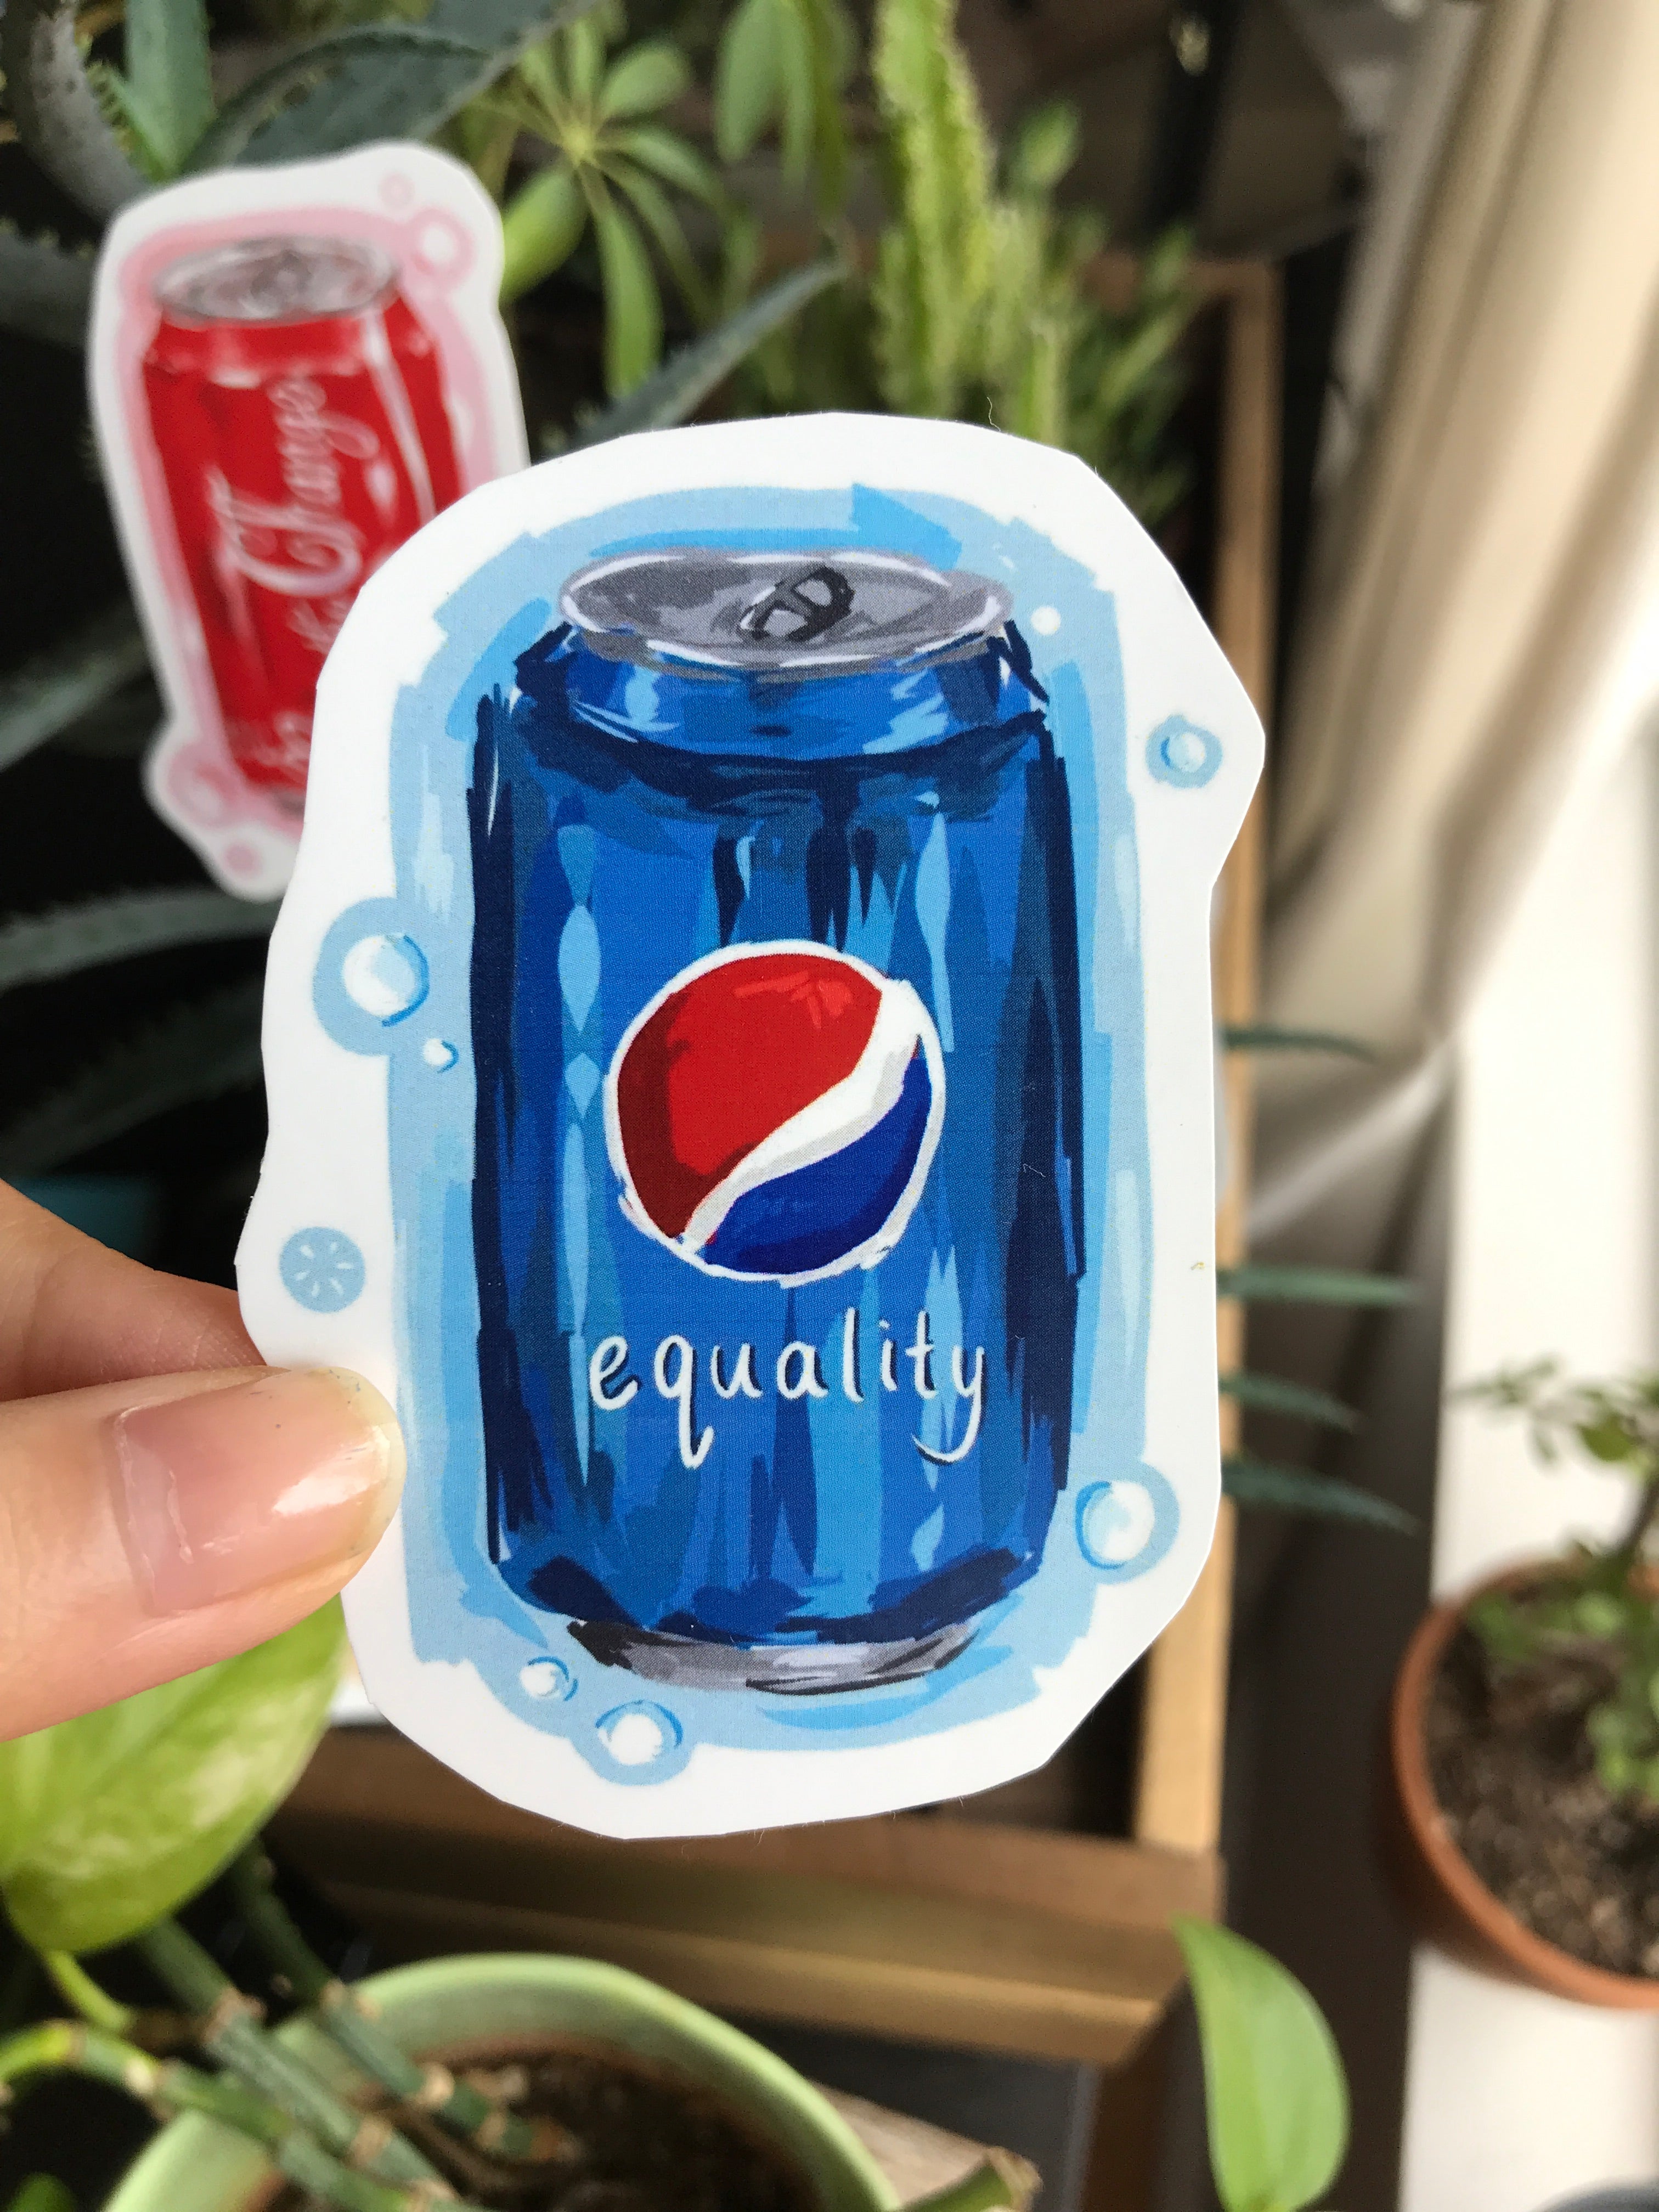 "Equality" soda can sticker